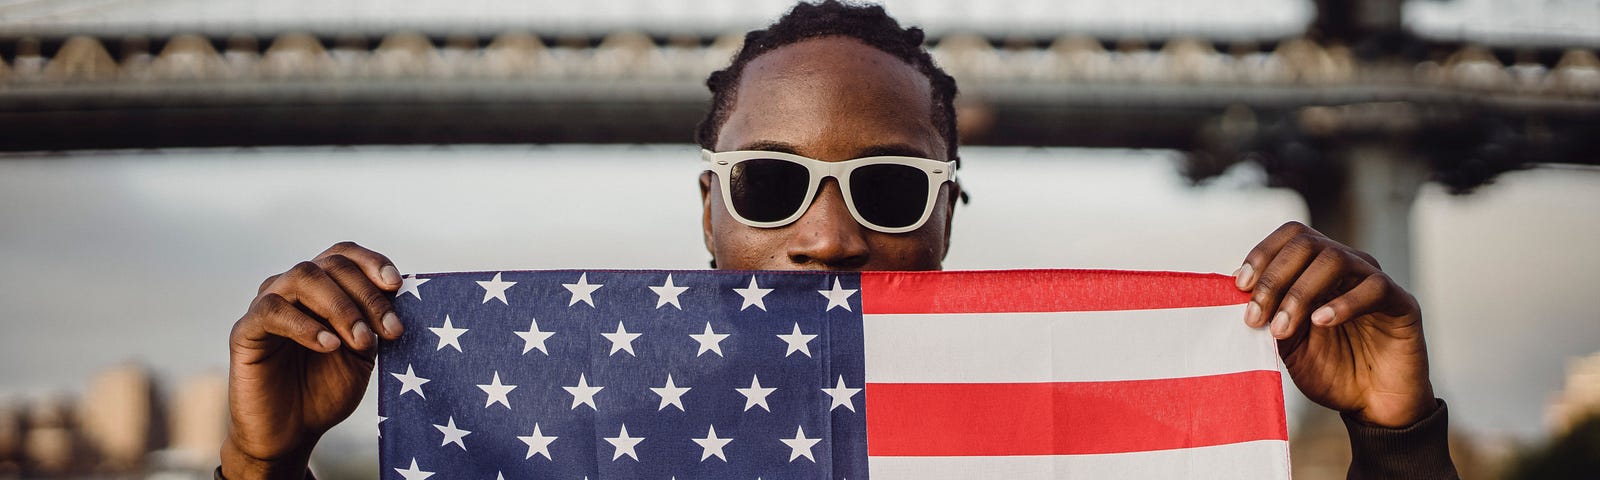 Black man wearing sunglasses, holding American flag up with both hands. Flag covers his mouth.